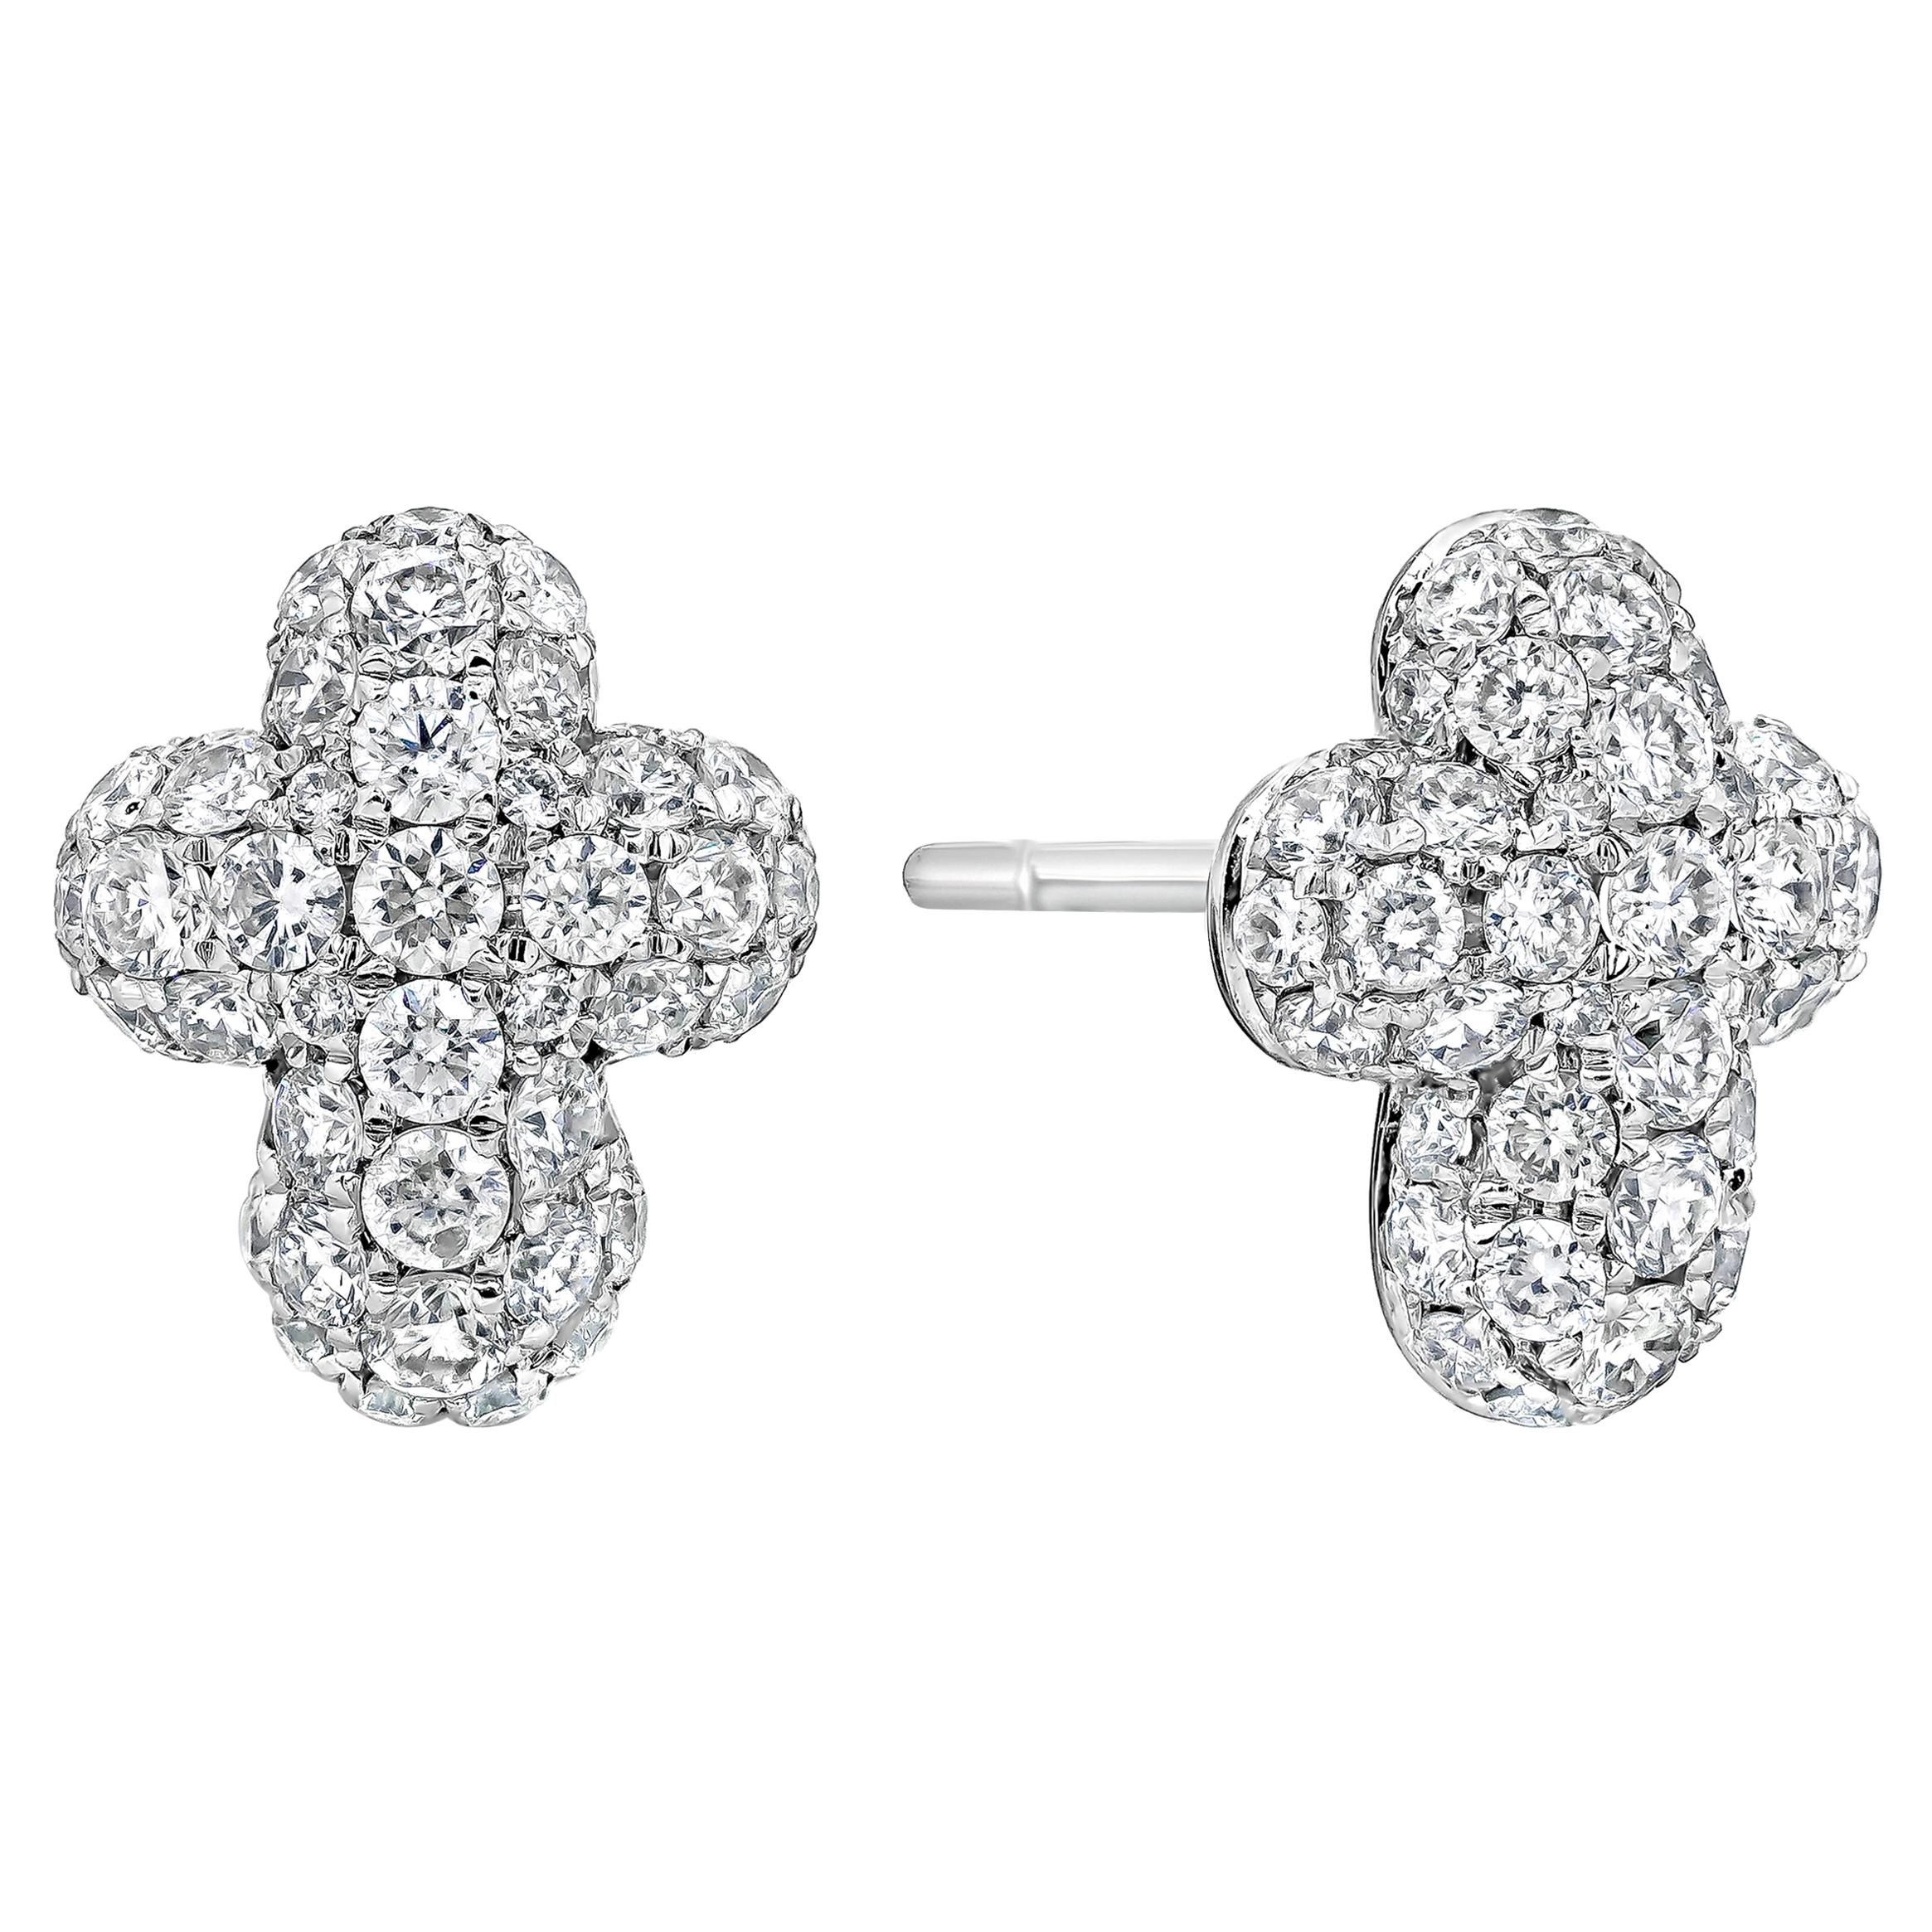 This pair of earrings showcasing a small and simple cross-shaped stud earrings encrusted with round brilliant diamonds weighing 1.30 carats total, set in a micro-pave design. Made in 14K White Gold.

Roman Malakov is a custom house, specializing in